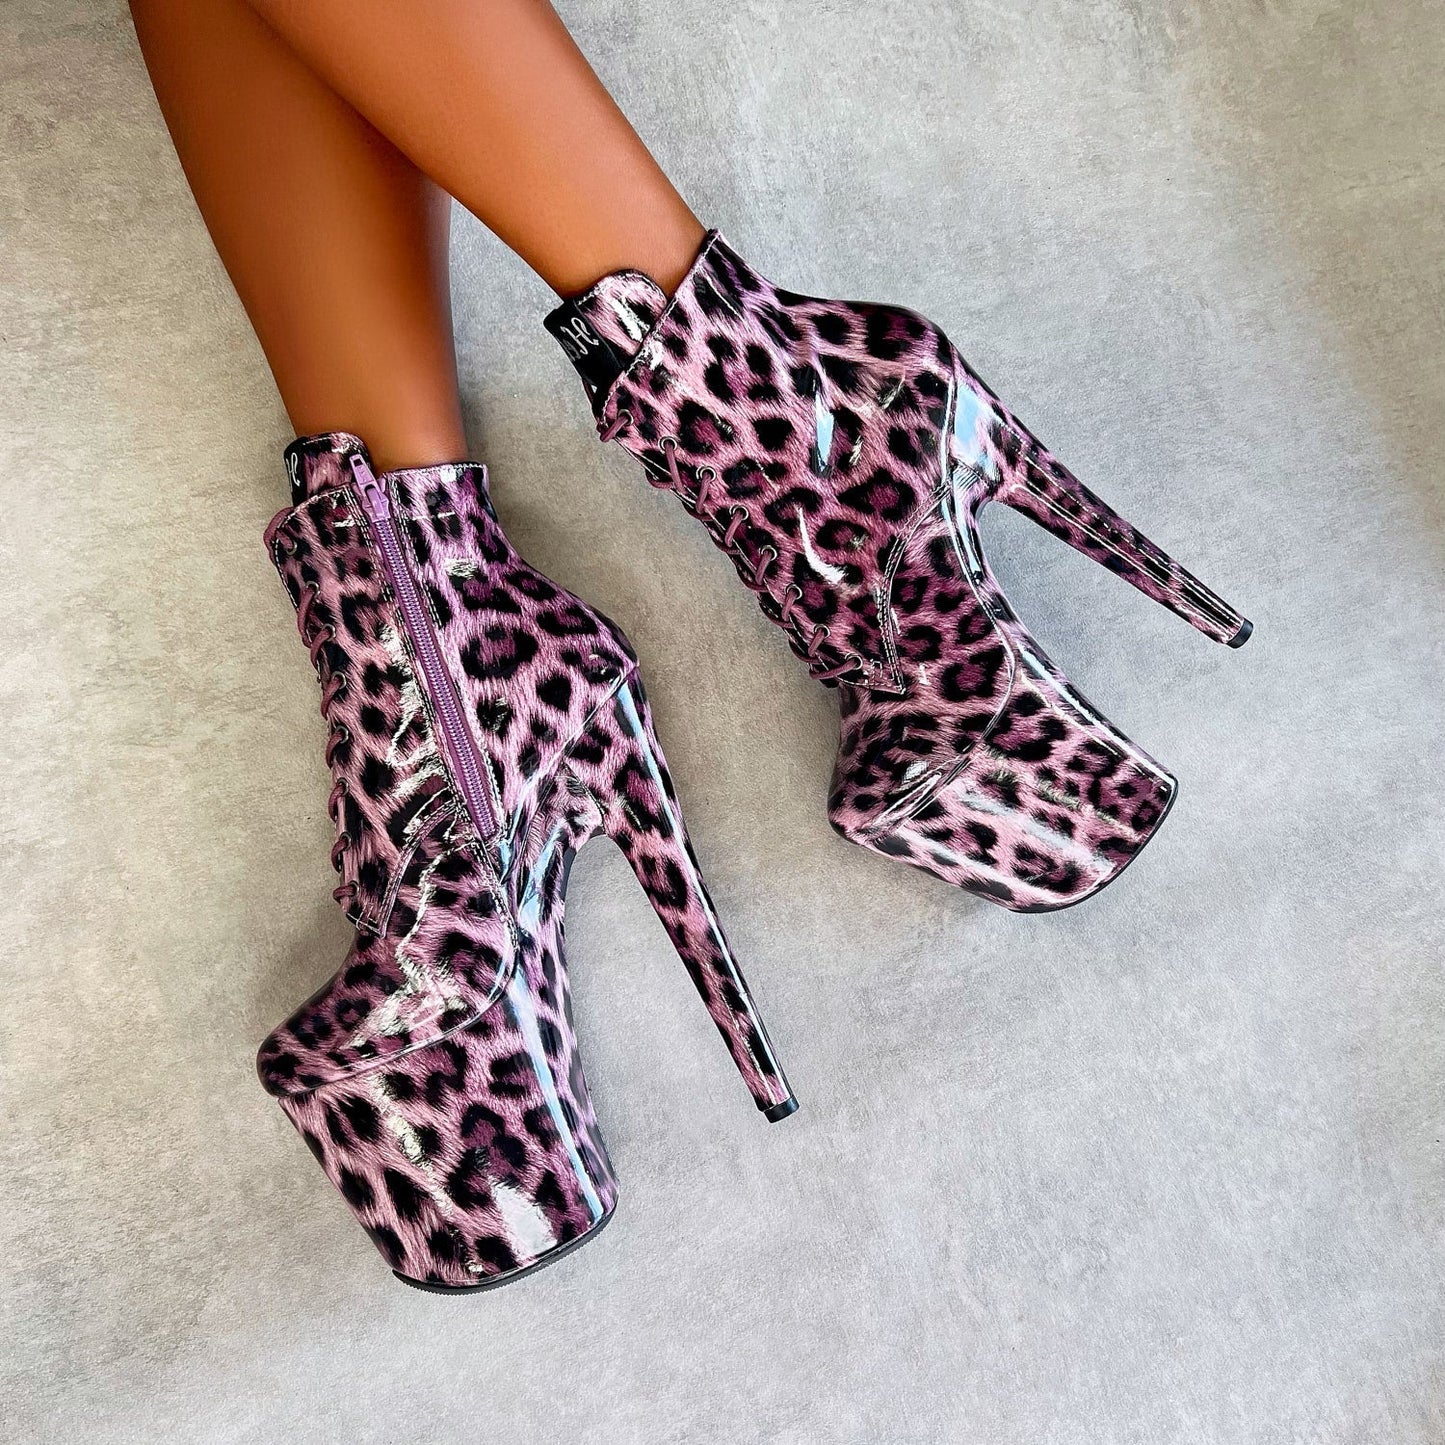 Purple Leopard Ankle Boot - 8 INCH + SP